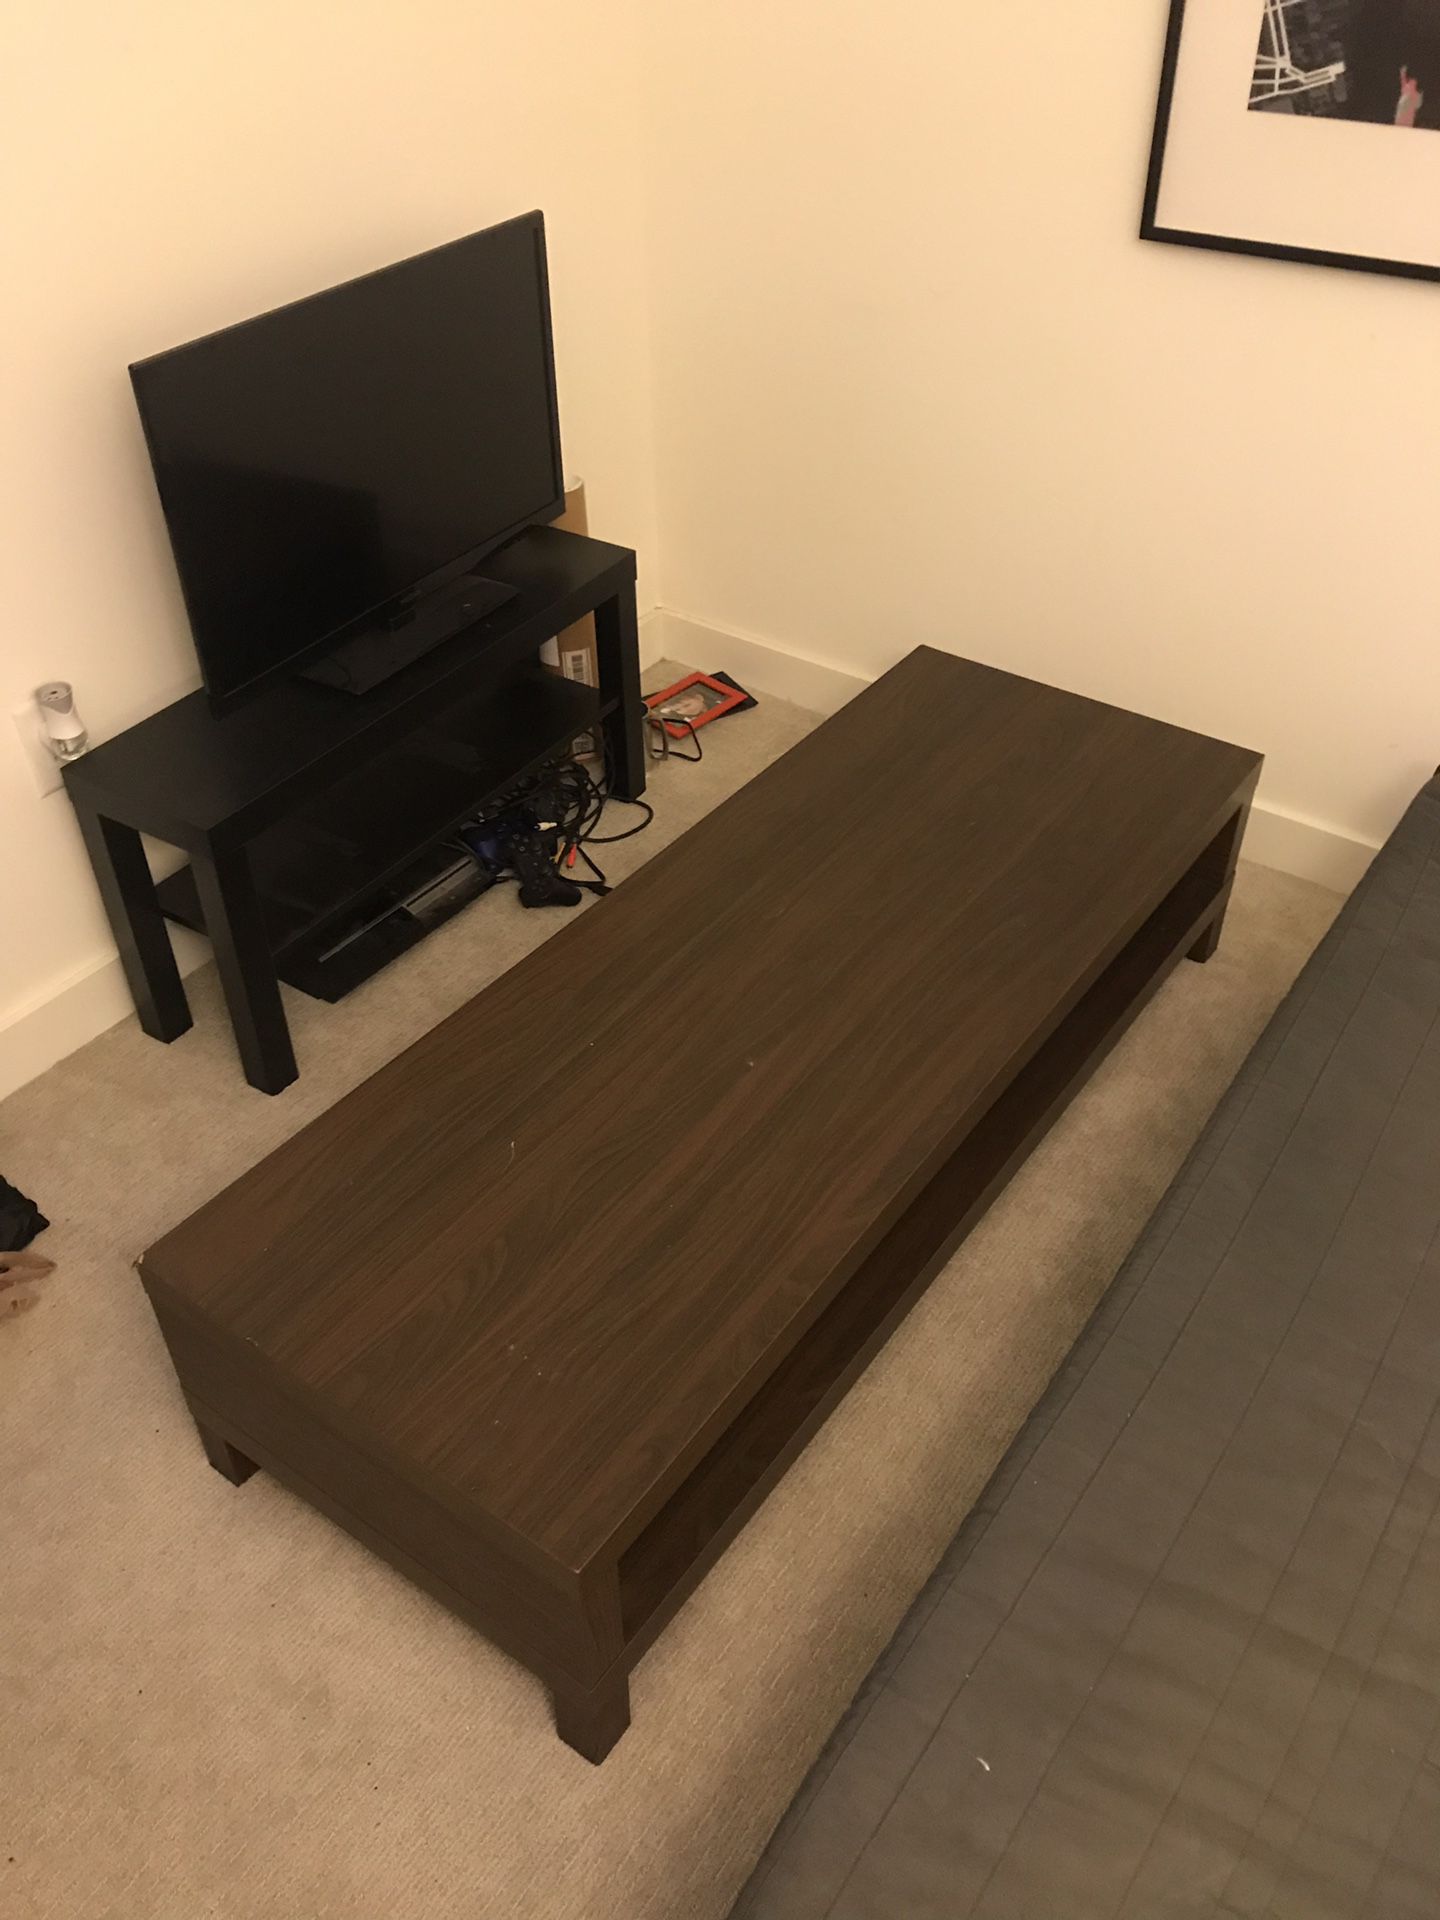 TV, TV stand, and coffee table